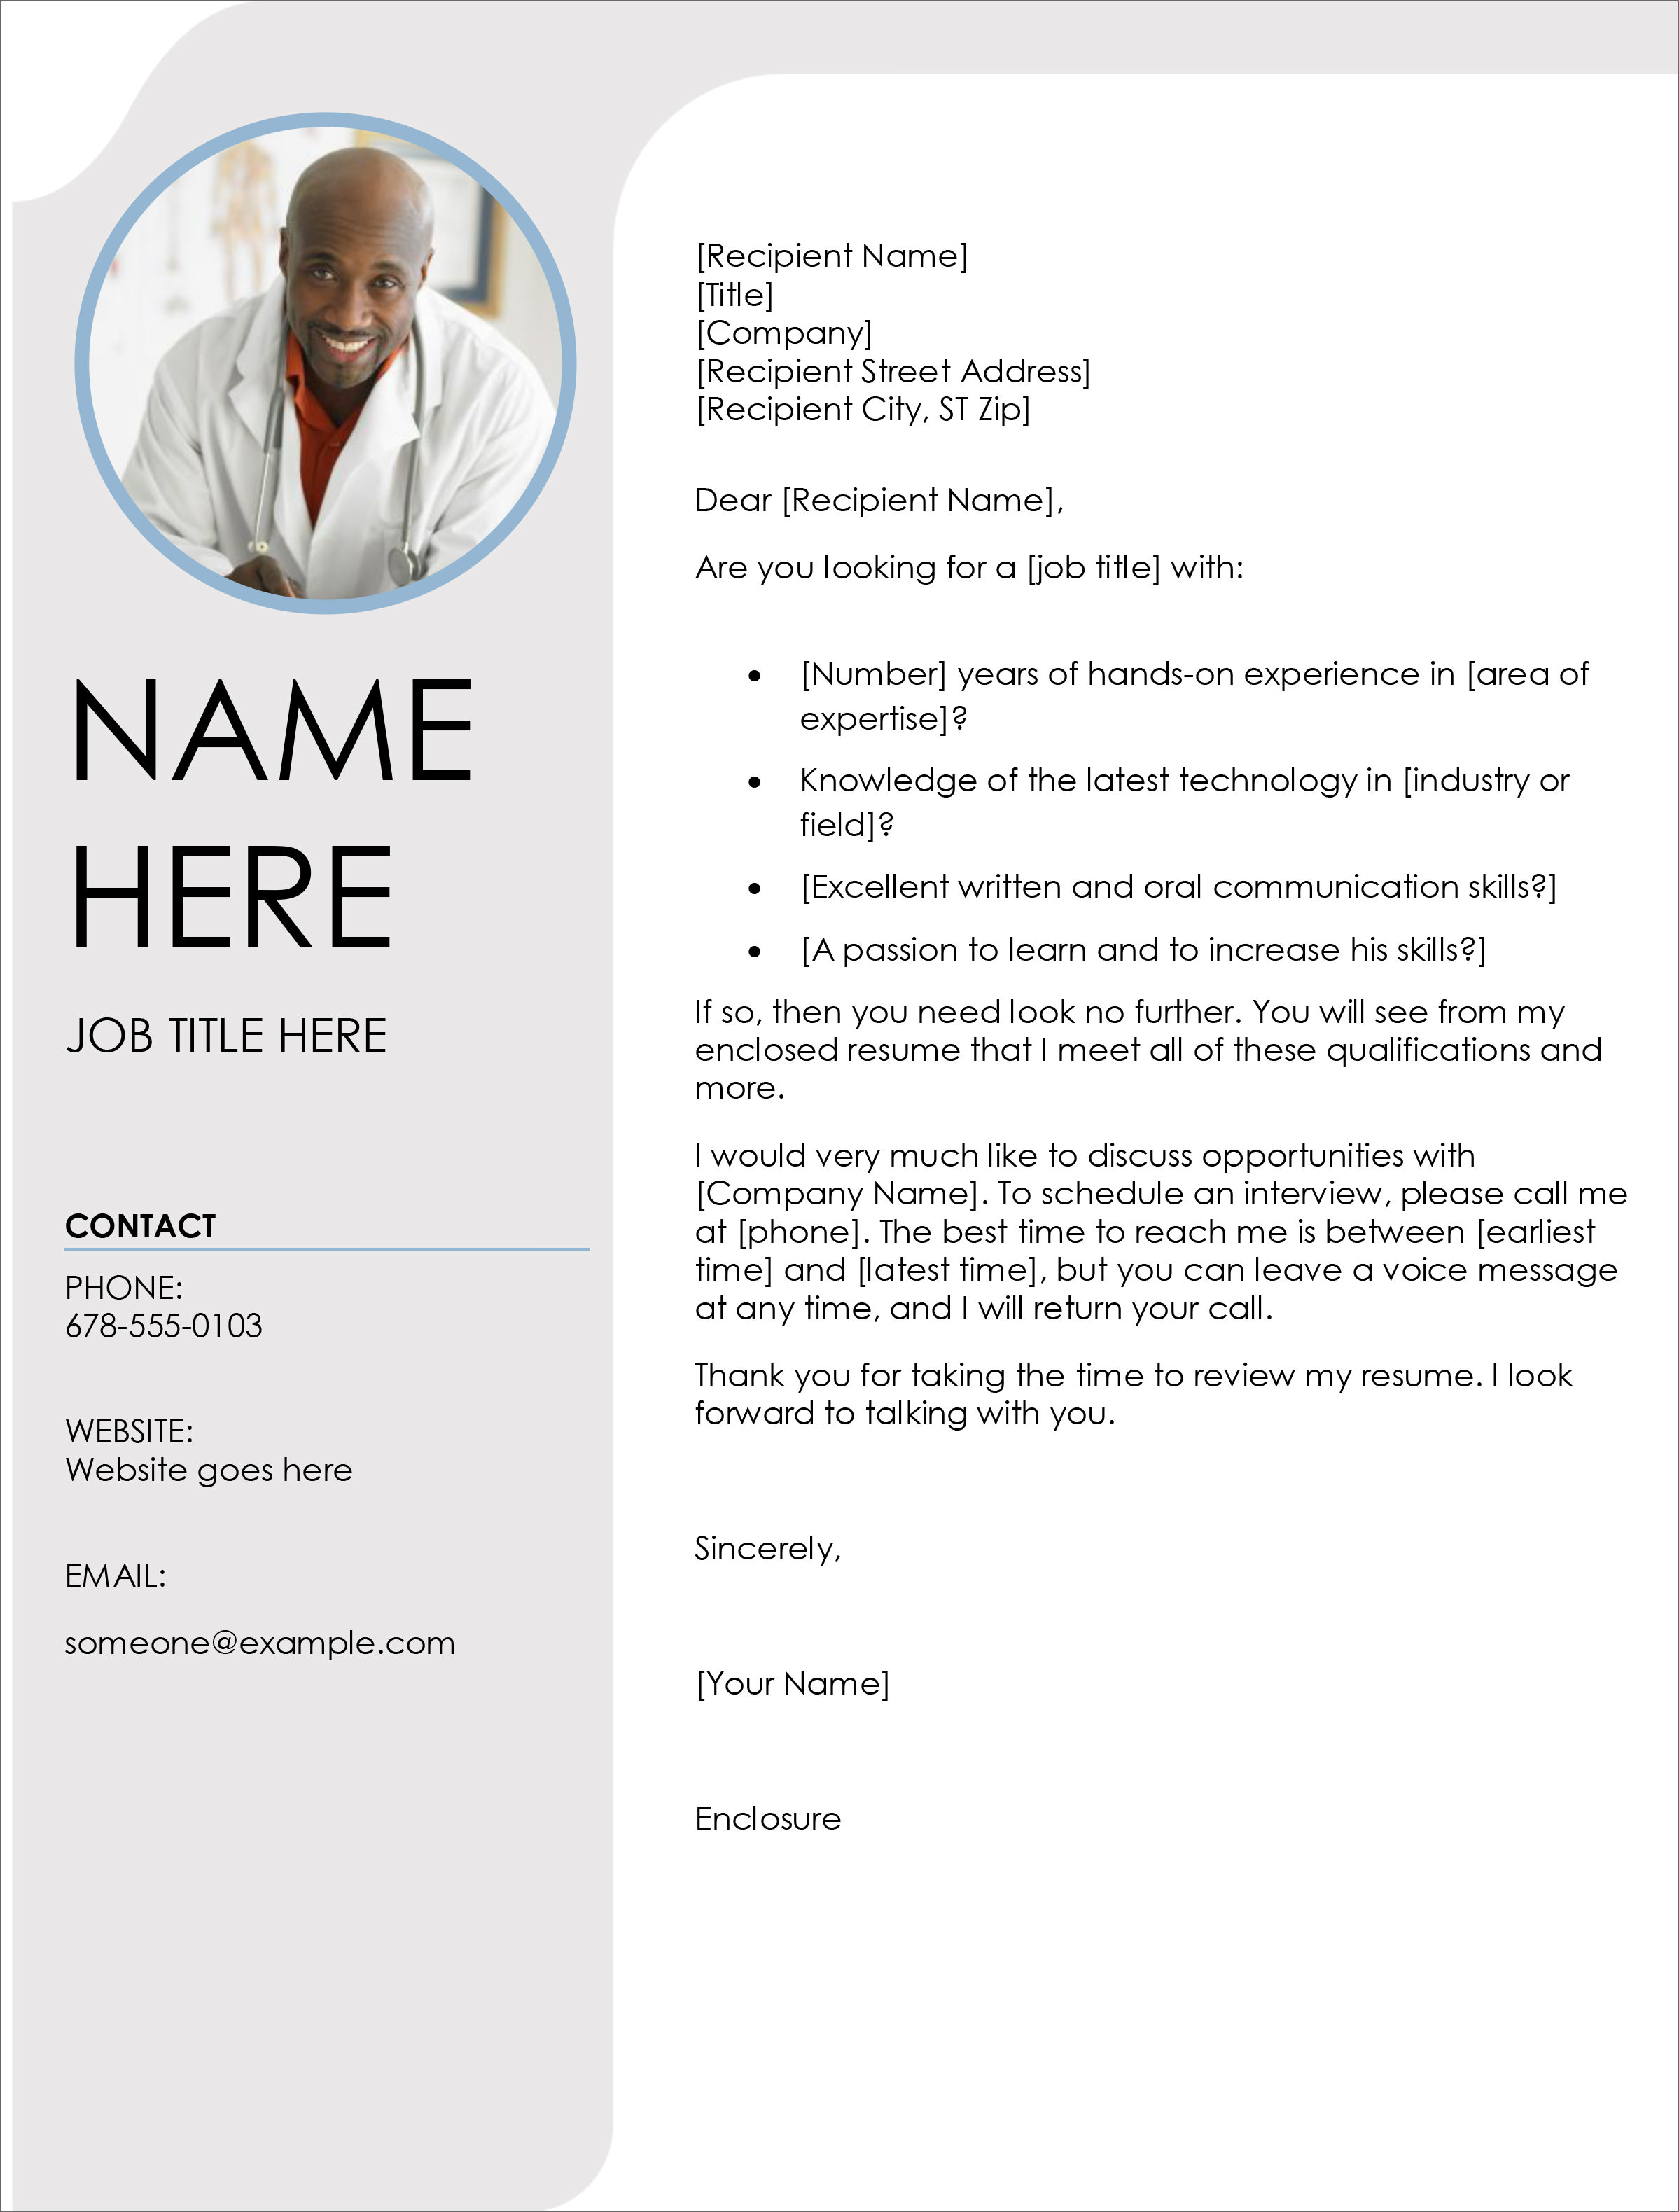 create-a-cover-letter-template